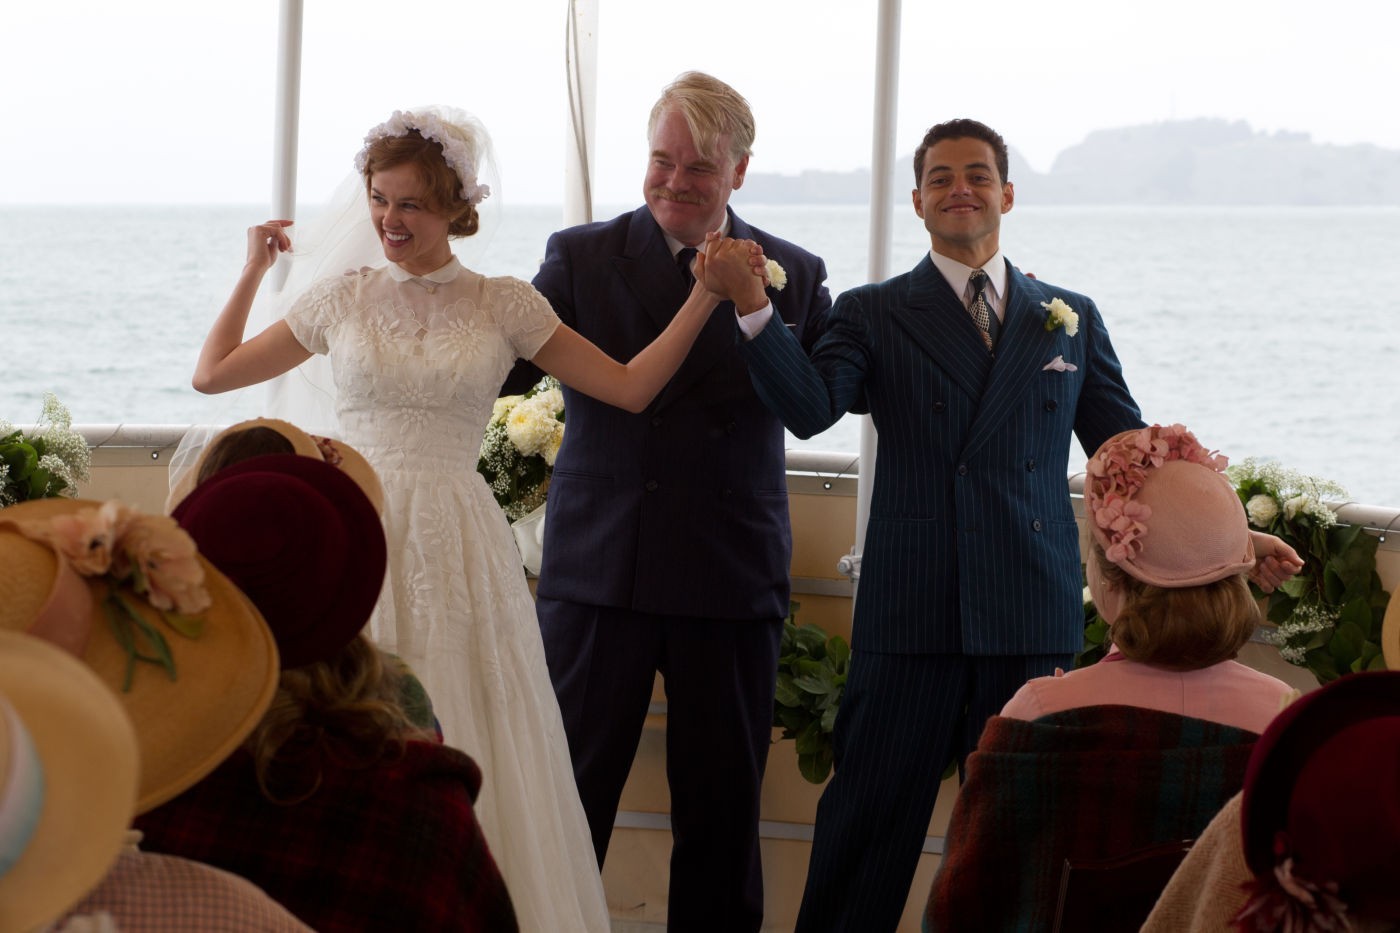 Ambyr Childers, Philip Seymour Hoffman and Rami Malek in The Weinstein Company's The Master (2012)